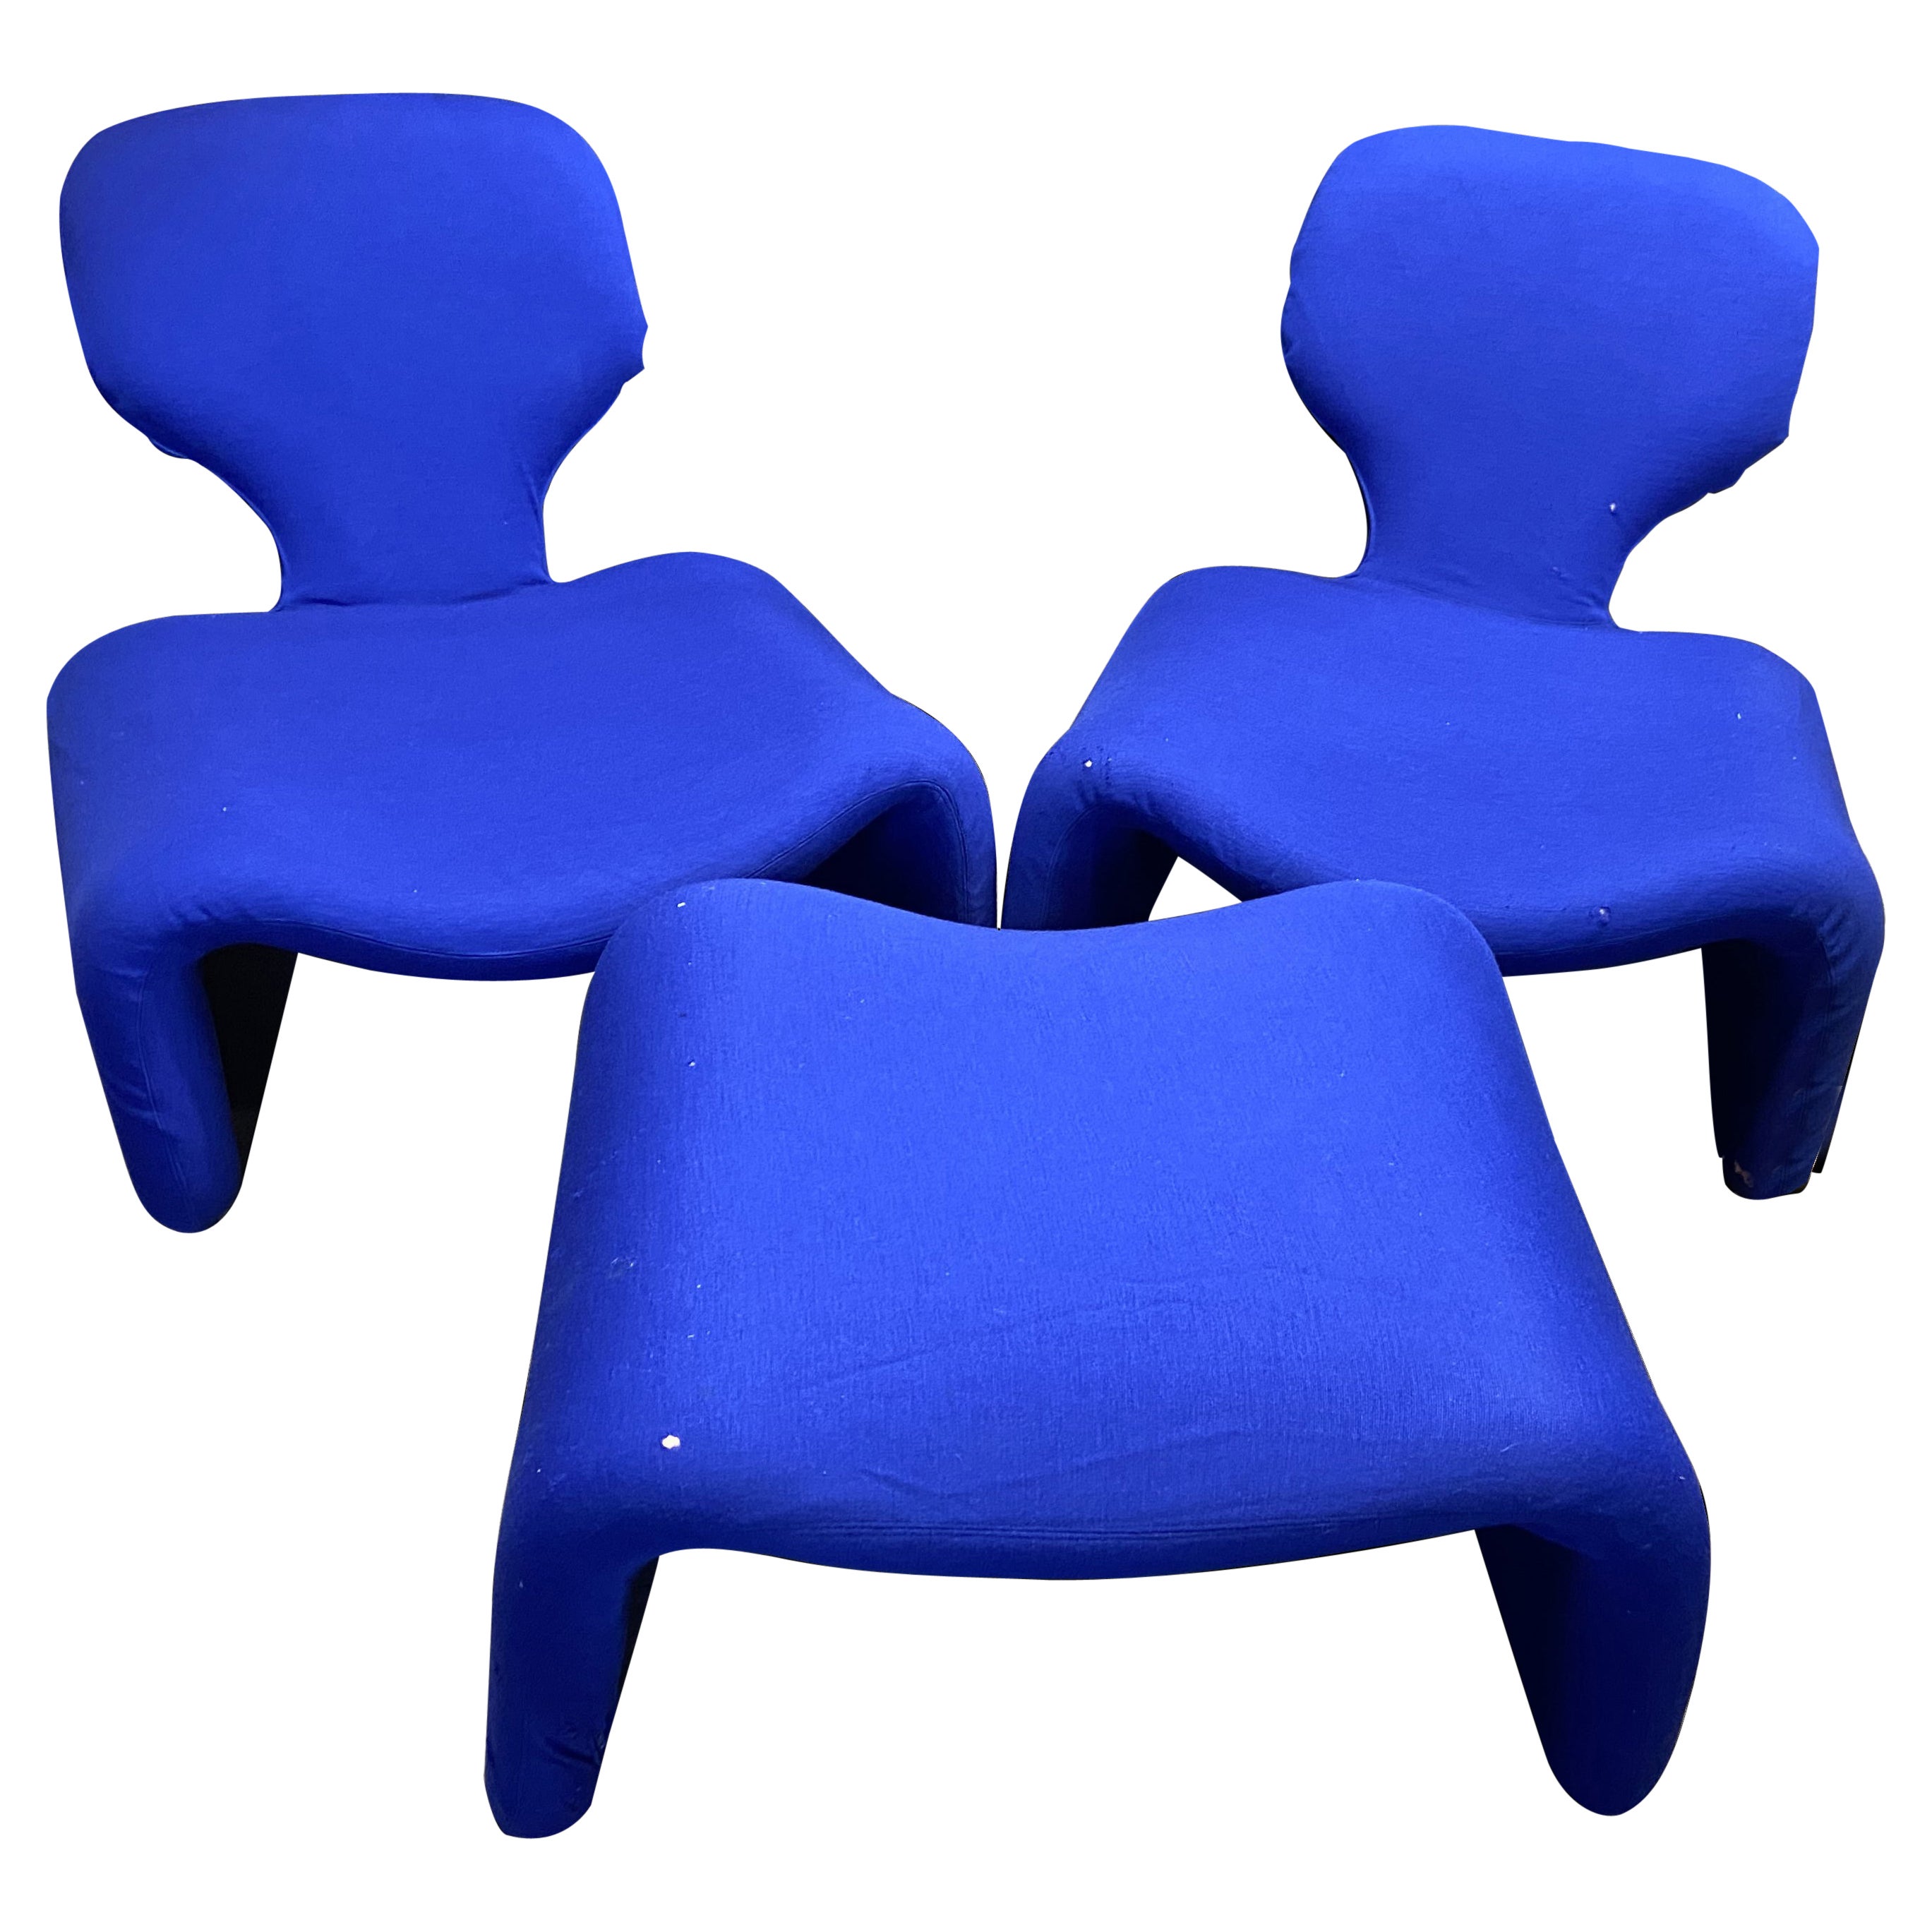 Pair of Djinn Chairs and Single Footstool by Olivier Mourguw for Airborne